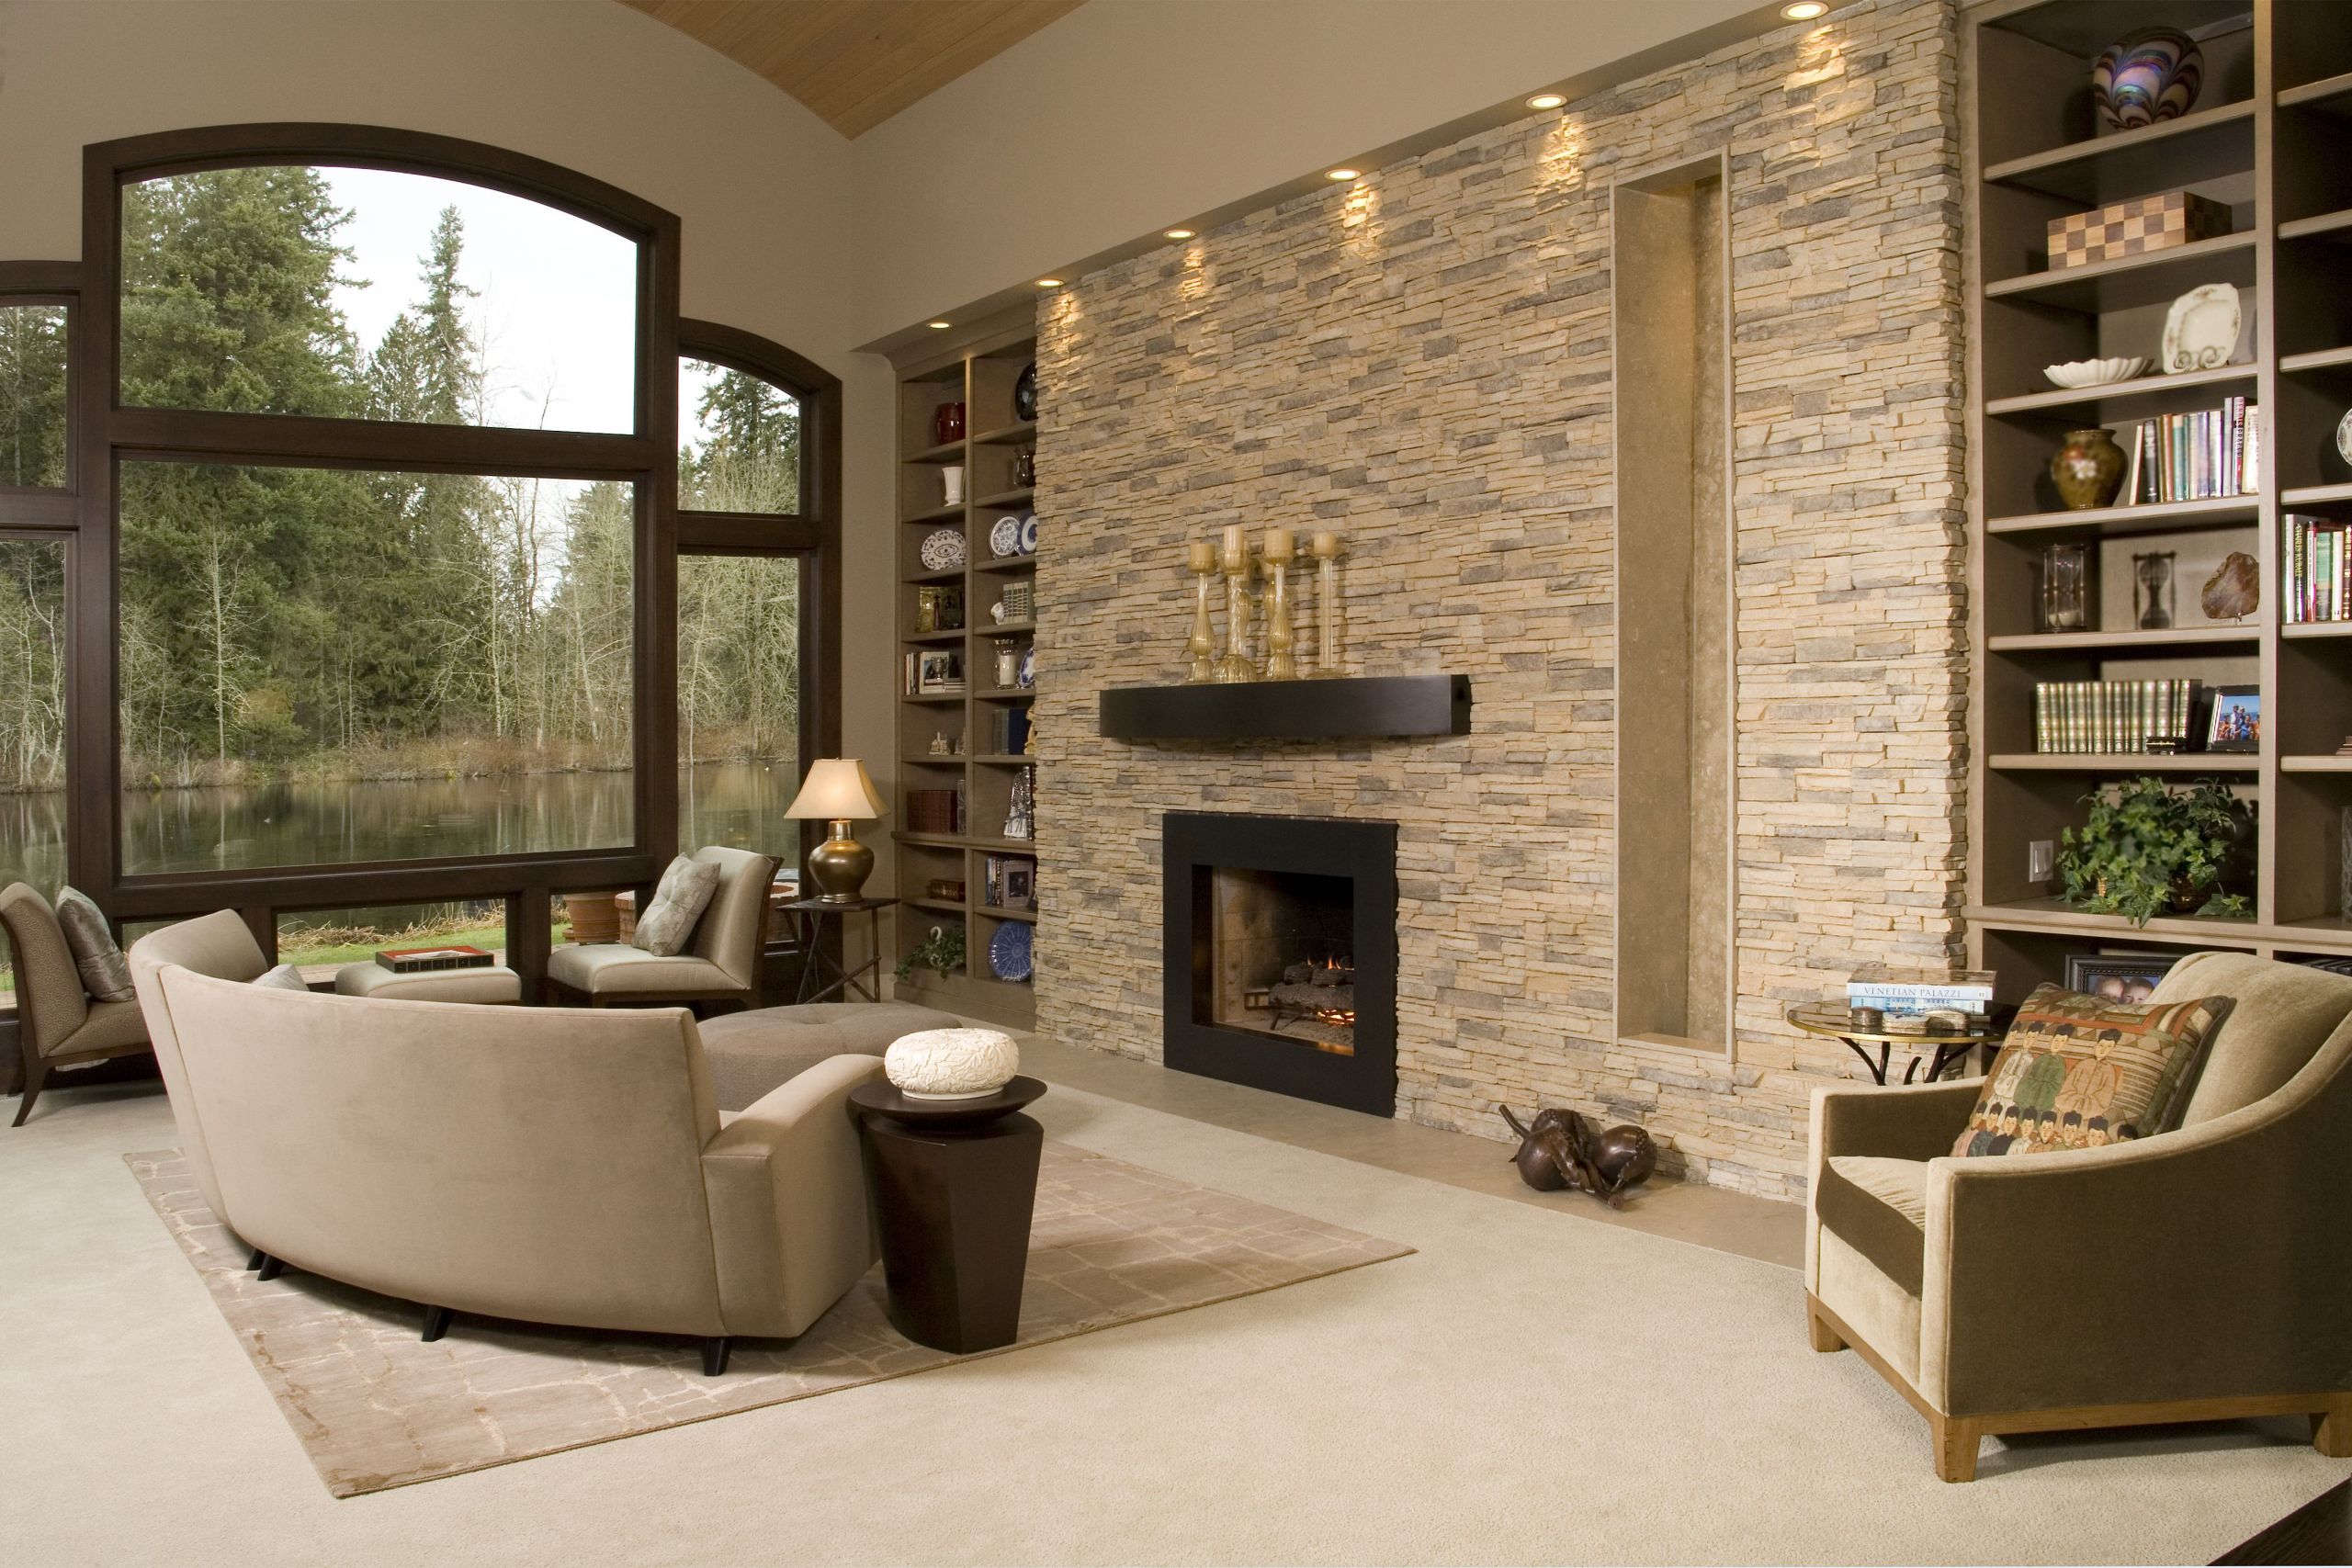 Stone Accent Wall Living Room
 Contemporary living room with stacked stone accent wall